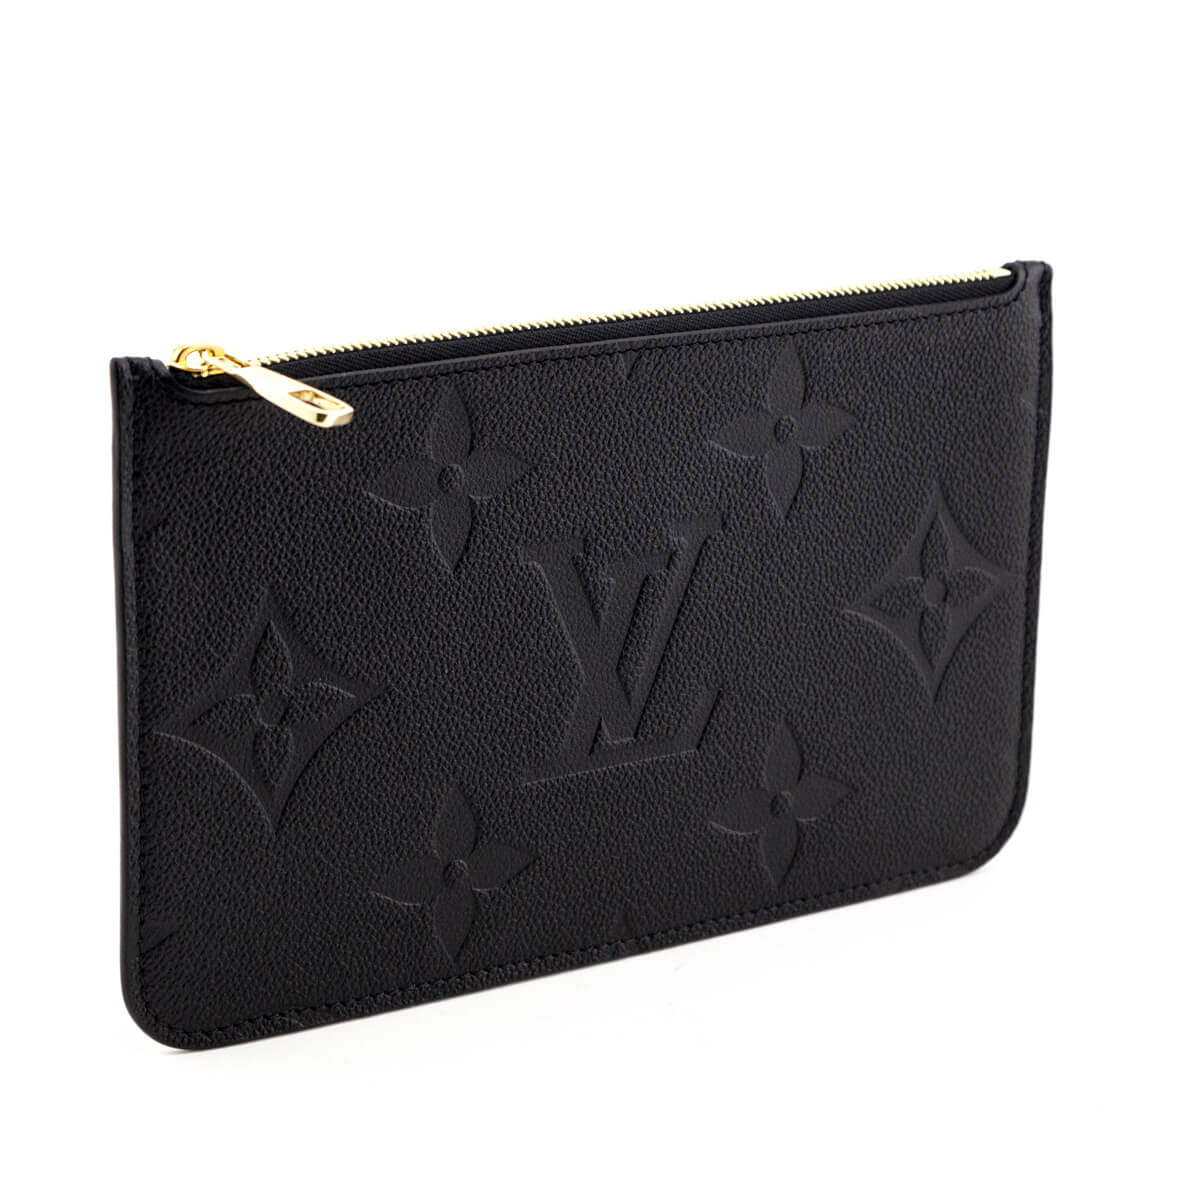 Easy Pouch Monogram Empreinte Leather - Women - Small Leather Goods